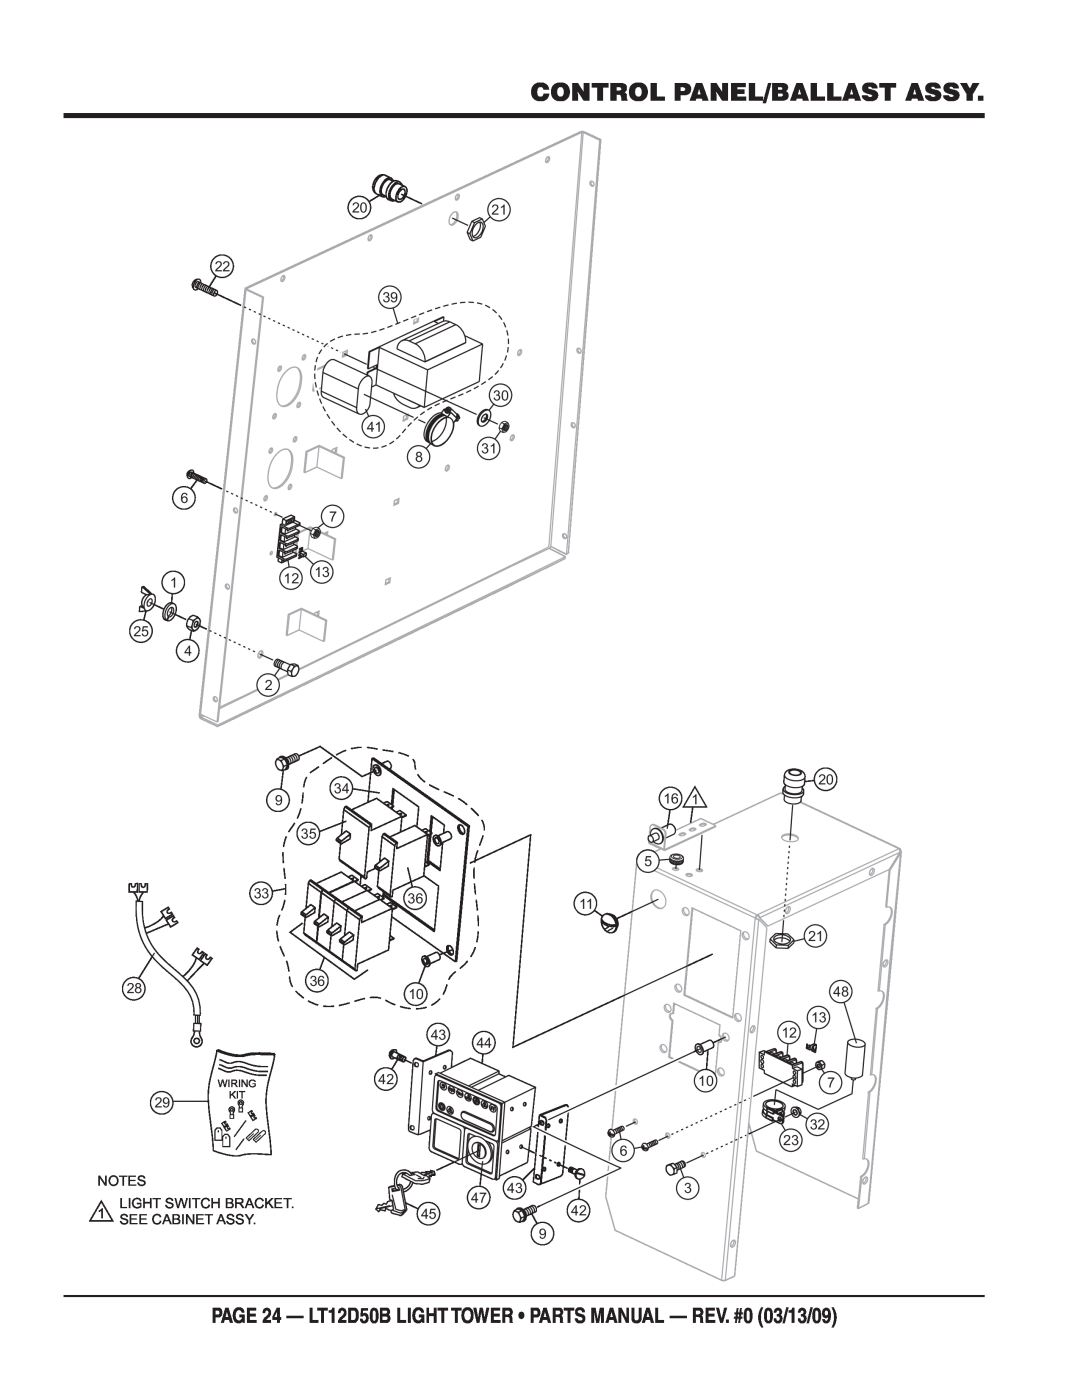 Multiquip Control Panel/Ballast Assy, PAGE 24 - LT12D50B LIGHT TOWER PARTS MANUAL - REV. #0 03/13/09, 2021, Wiring 